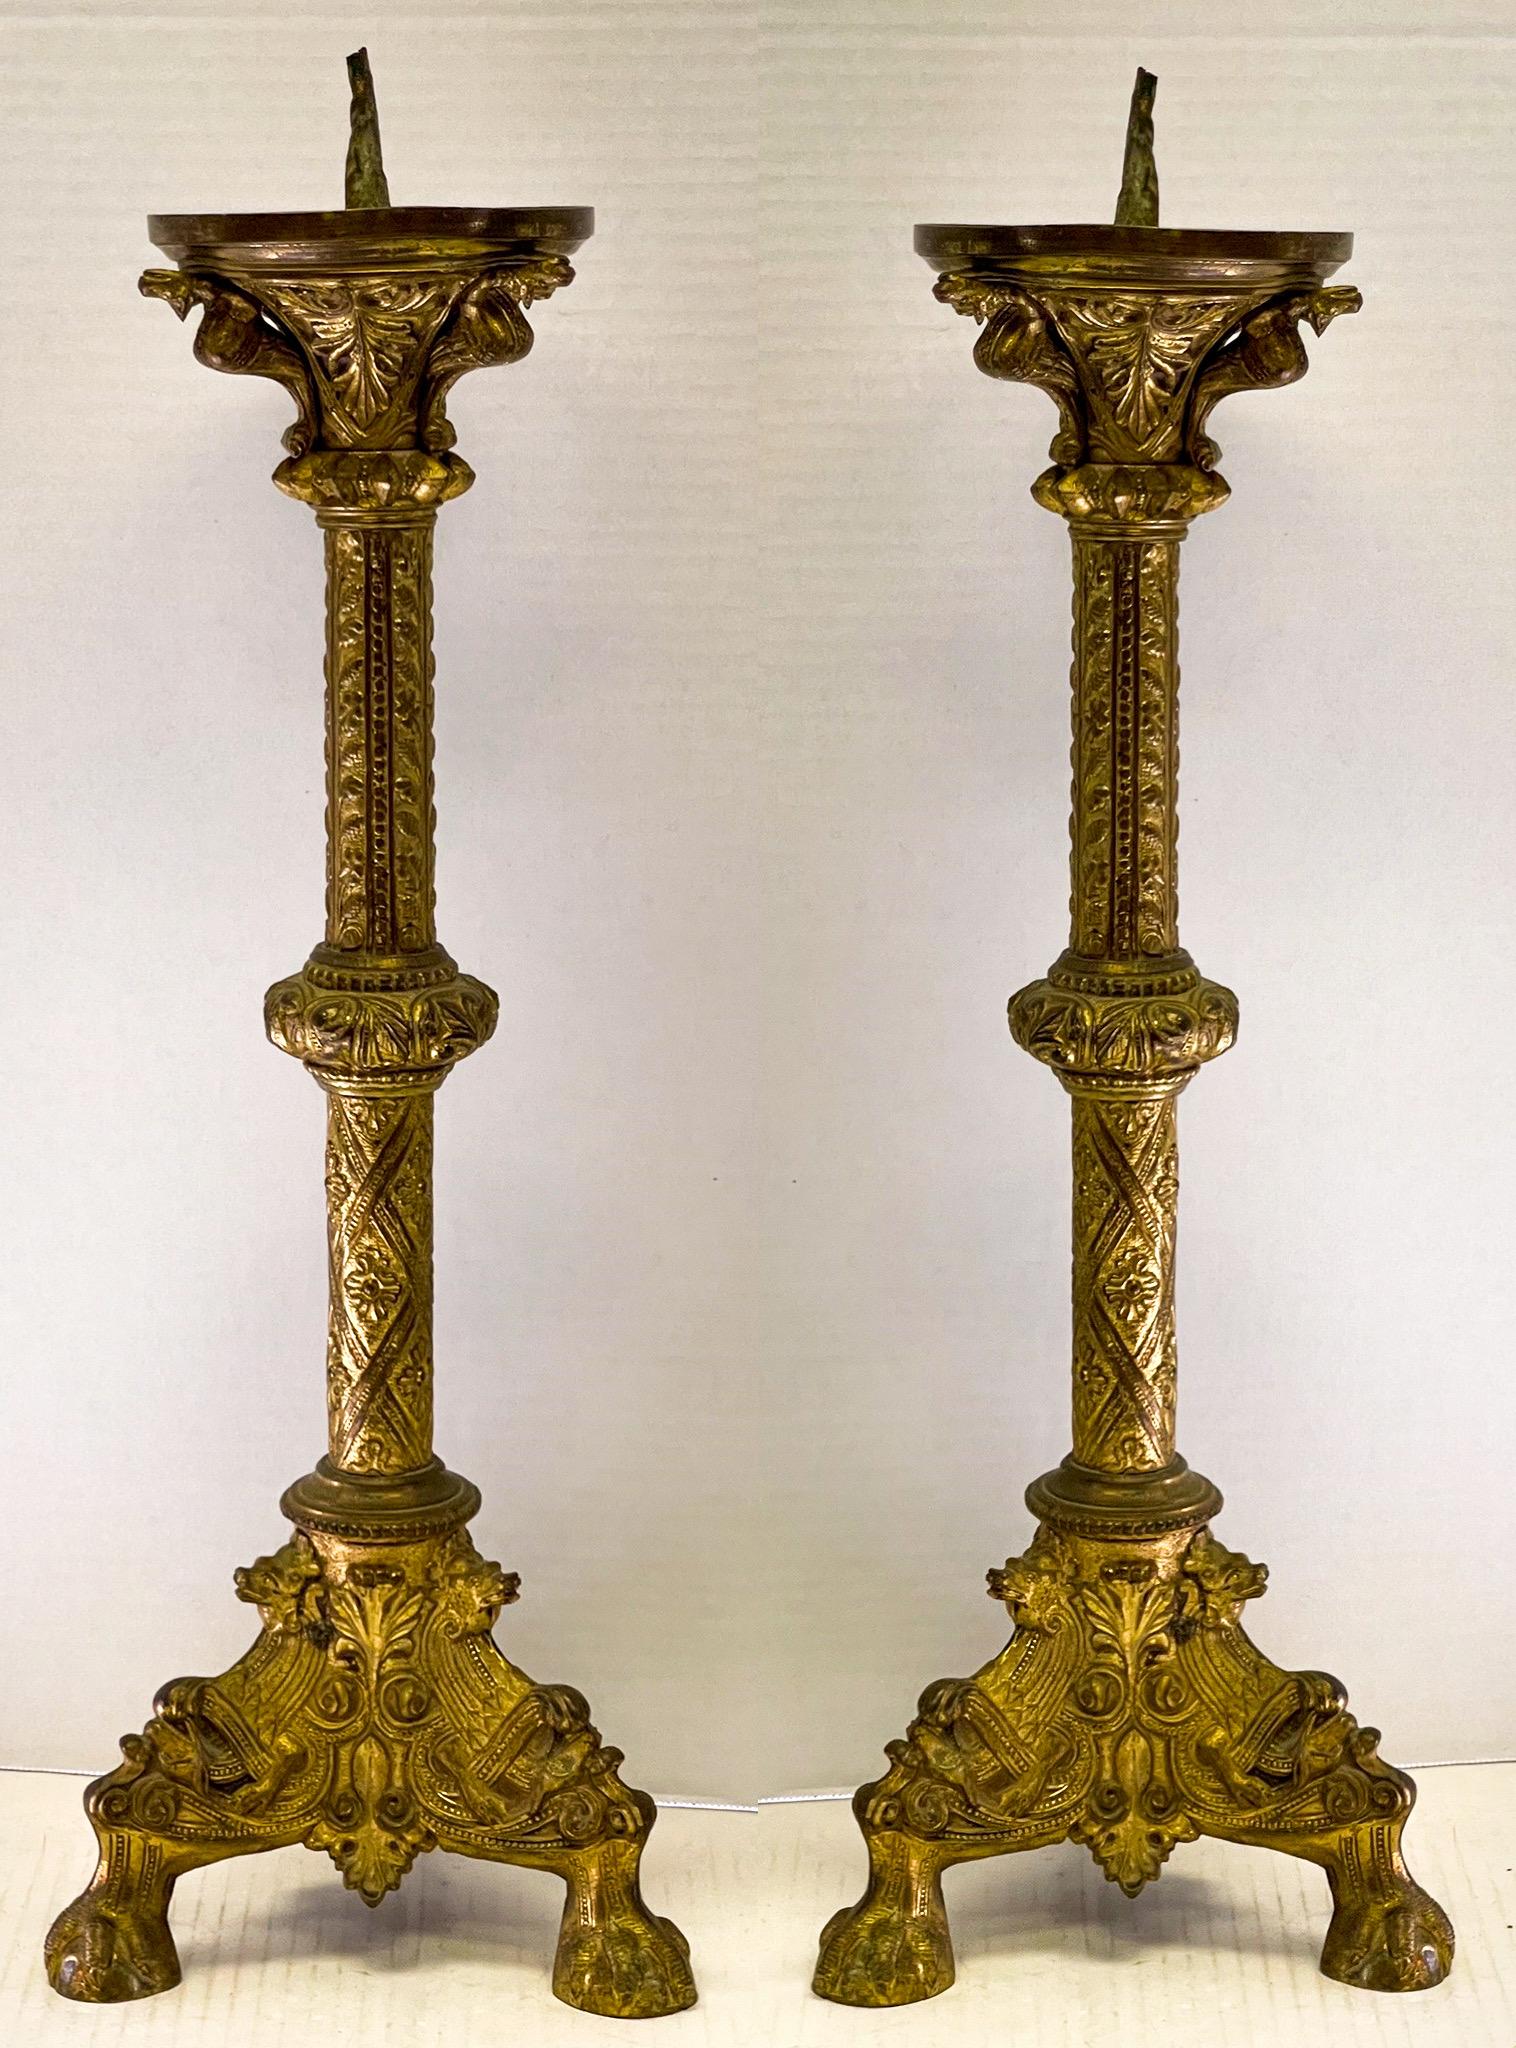 This is an amazing pair of 19th century Italian brass repousse church alter candlesticks. Note the clawed feet with the exceptional detail. Another special feature is the three serpents that are supporting the candle cups!